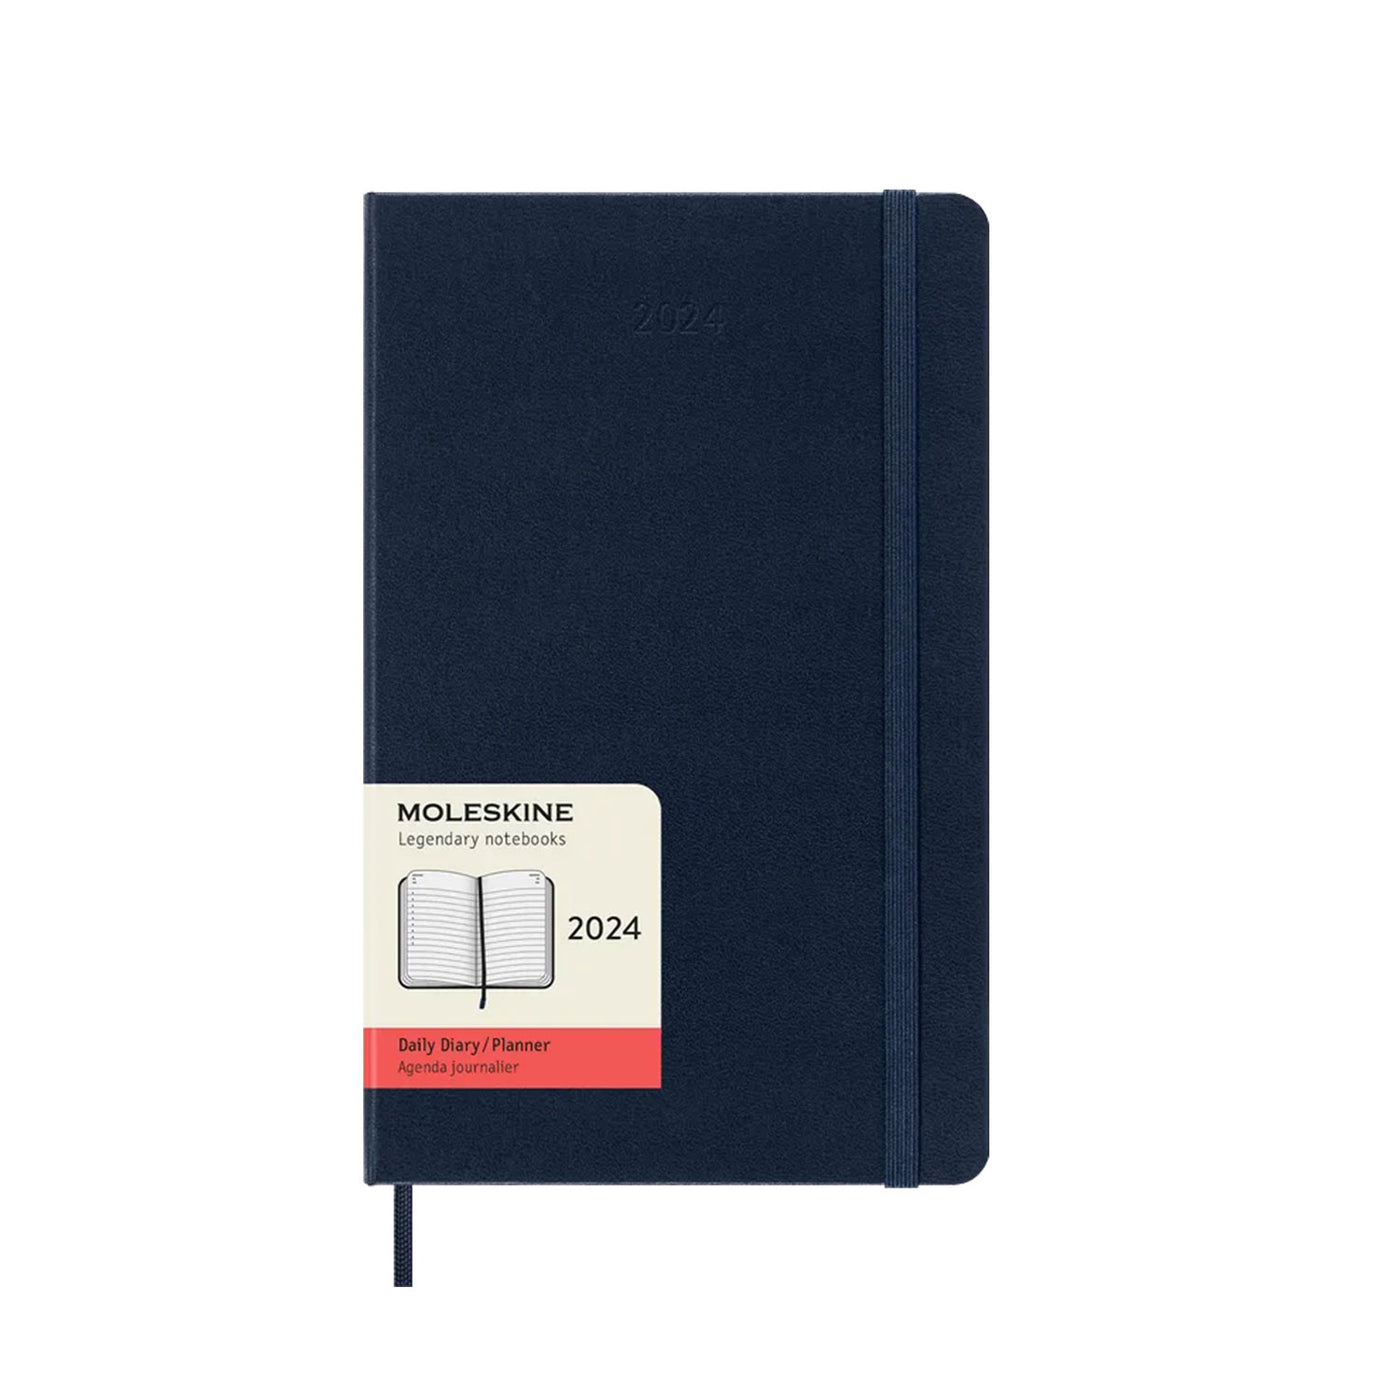 Moleskine 2024 Classic Large Hard Cover Daily Planner - Sapphire Blue